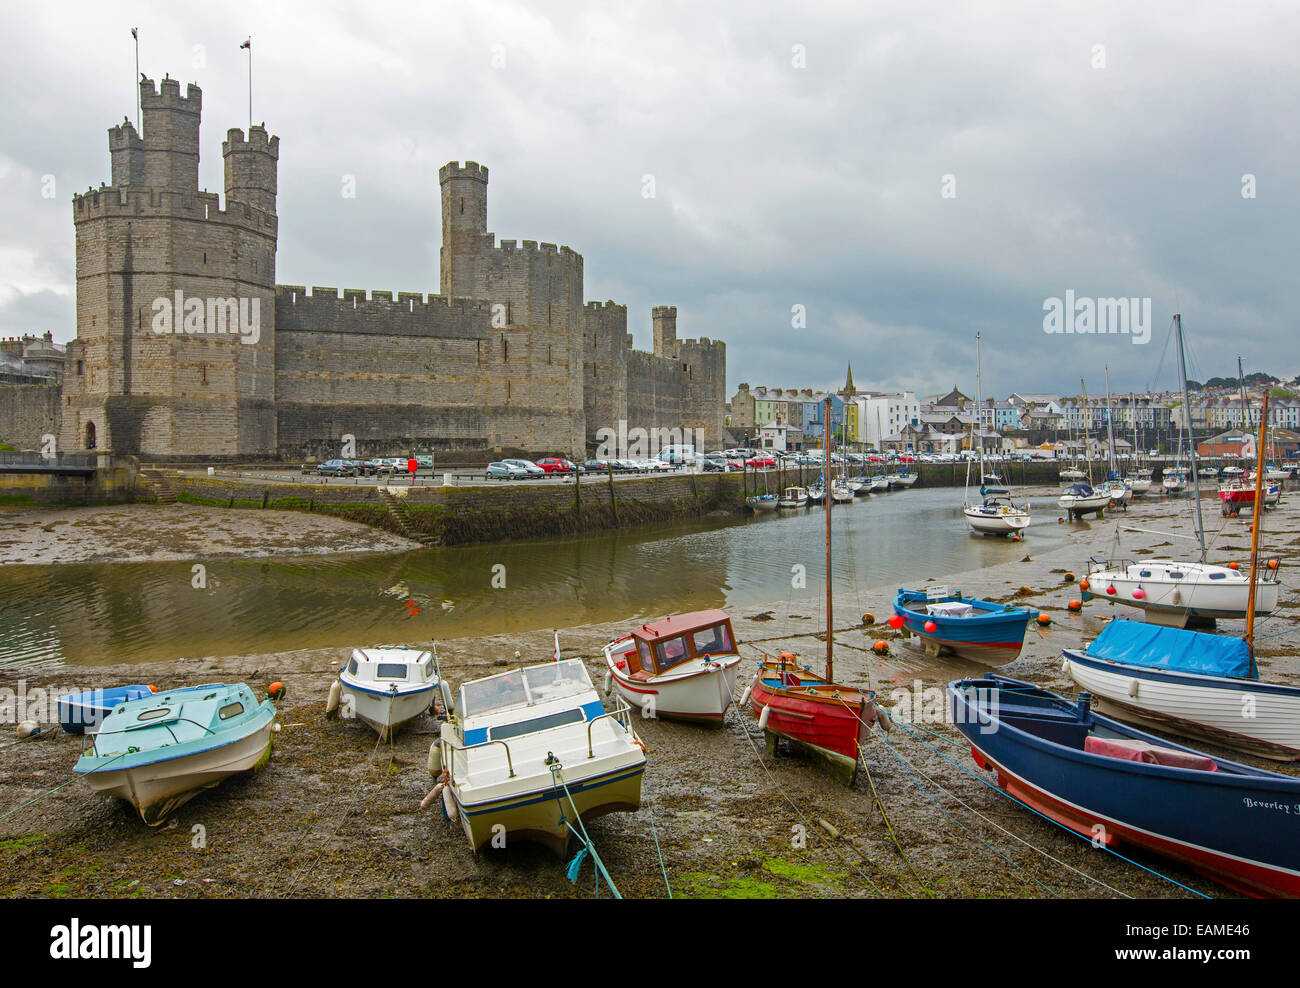 Huge, spectacular Caernarfon castle towering over River Seiont harbour & colourful boats with town in distance under stormy sky Stock Photo